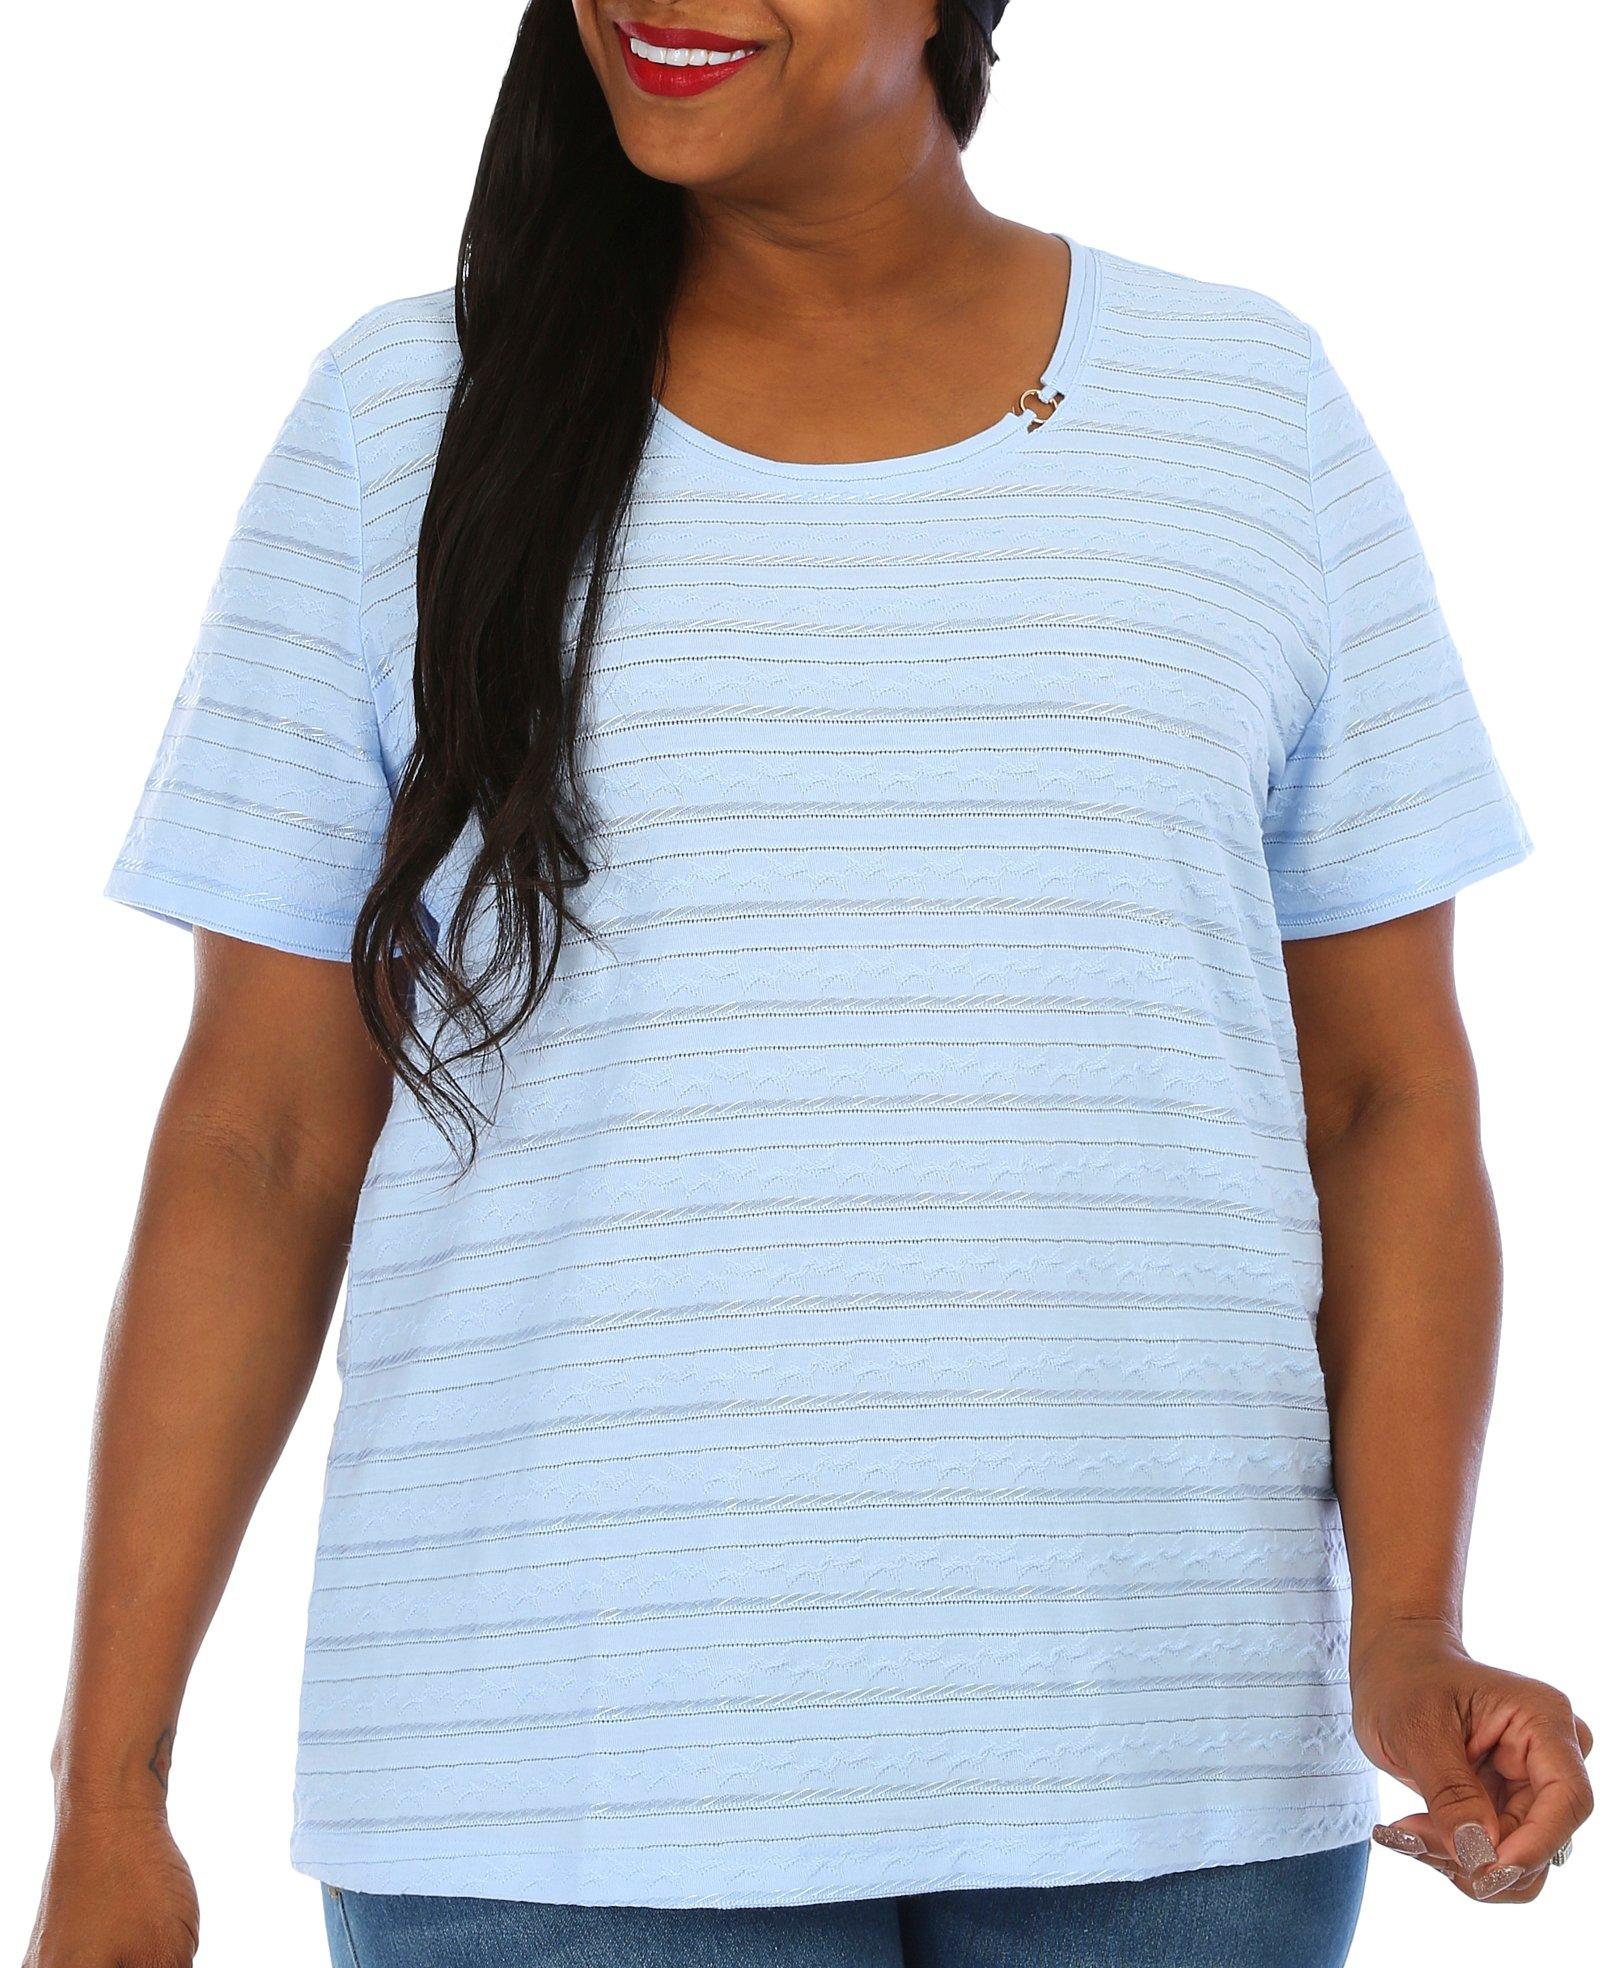 Coral Bay Plus Textured Short Sleeve O-Ring Top